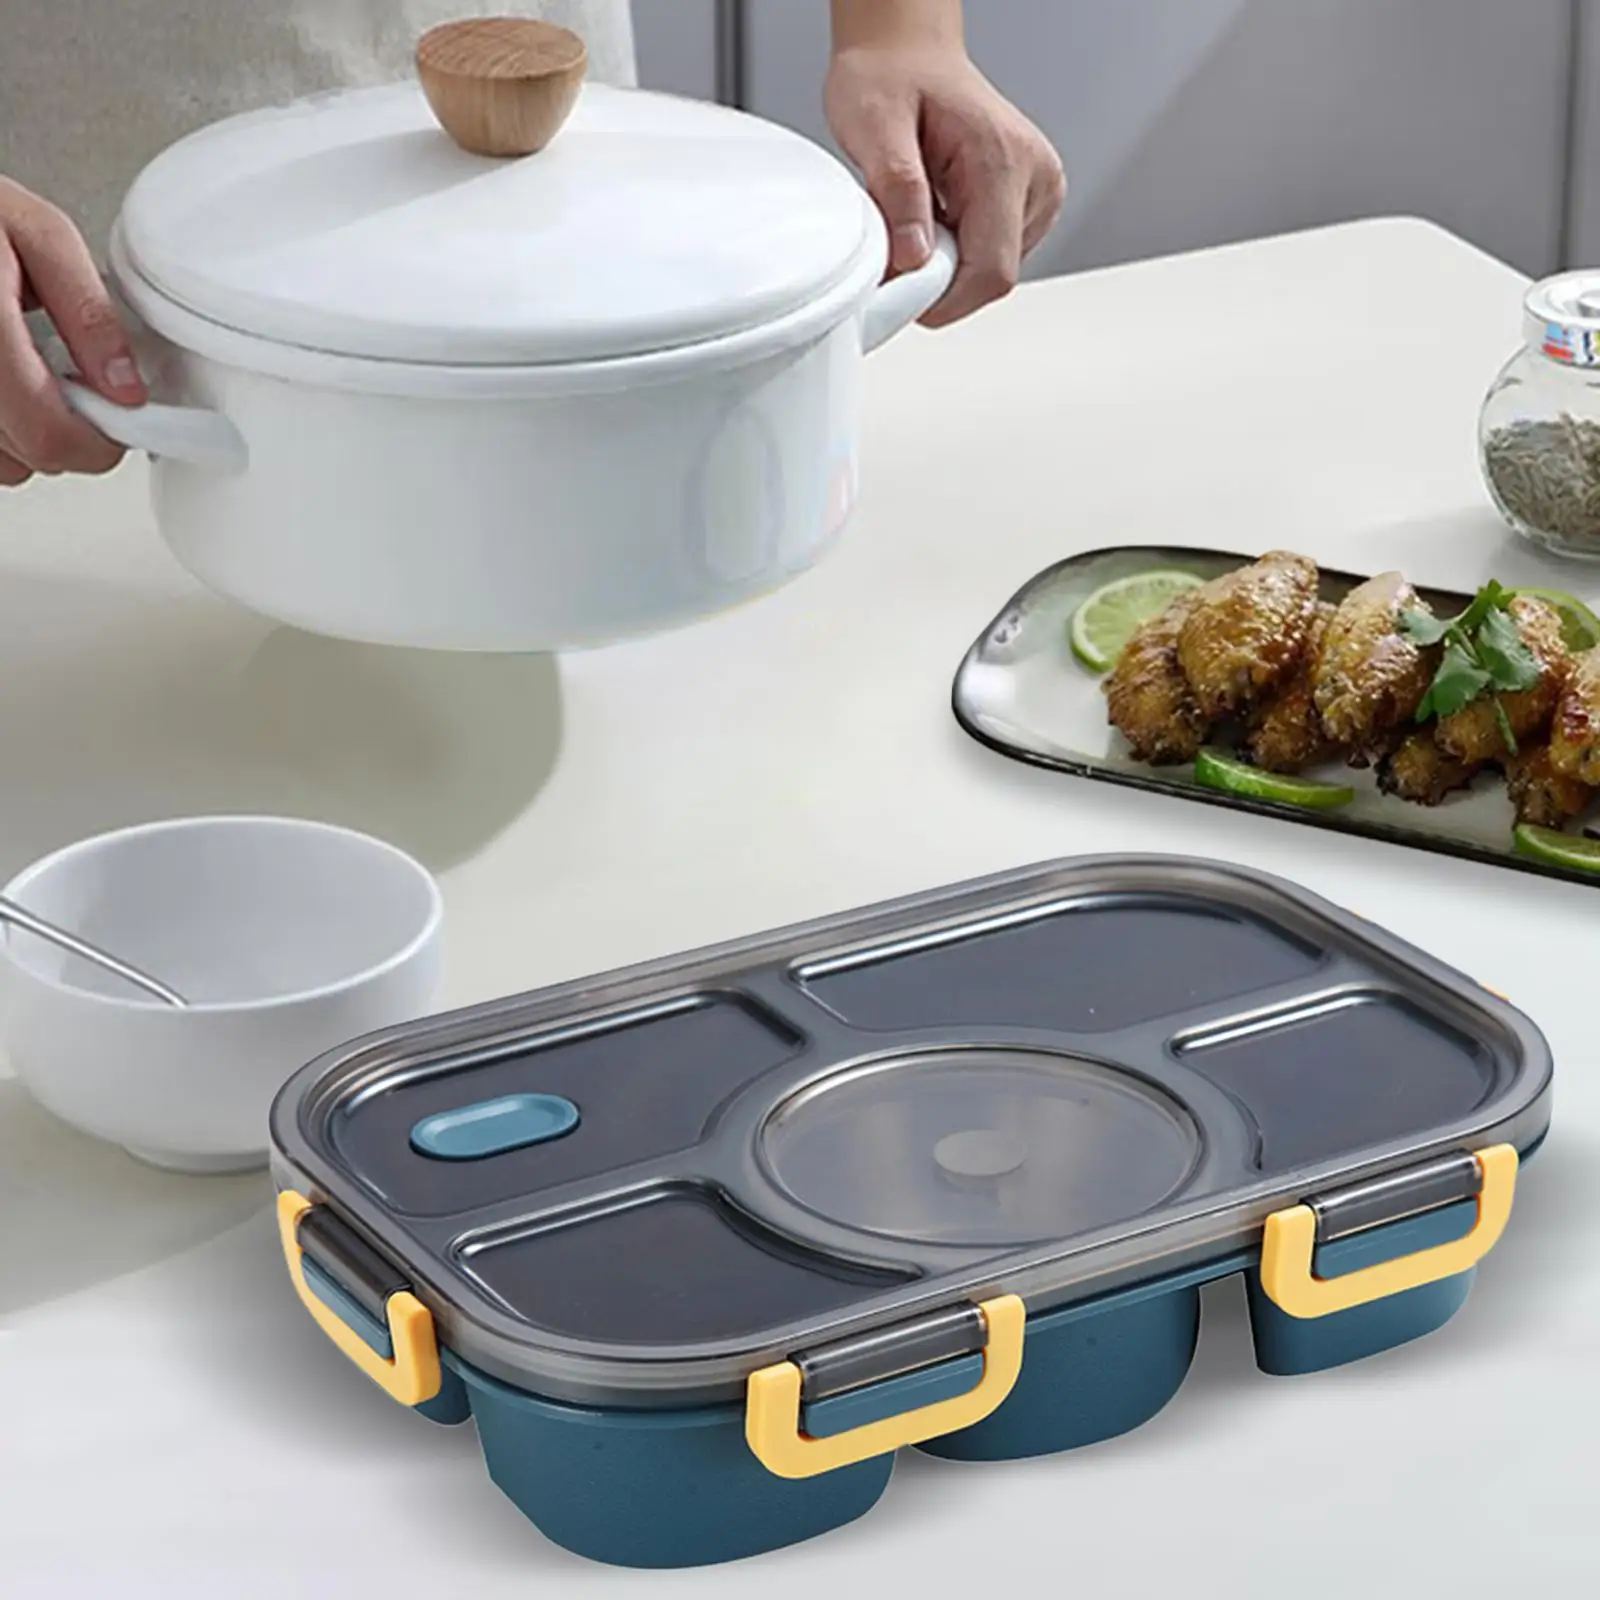 Portable Lunch Box Picnic Food Carrier Food Container Sushi Container Snack Box Bento Box Container for Home Adults